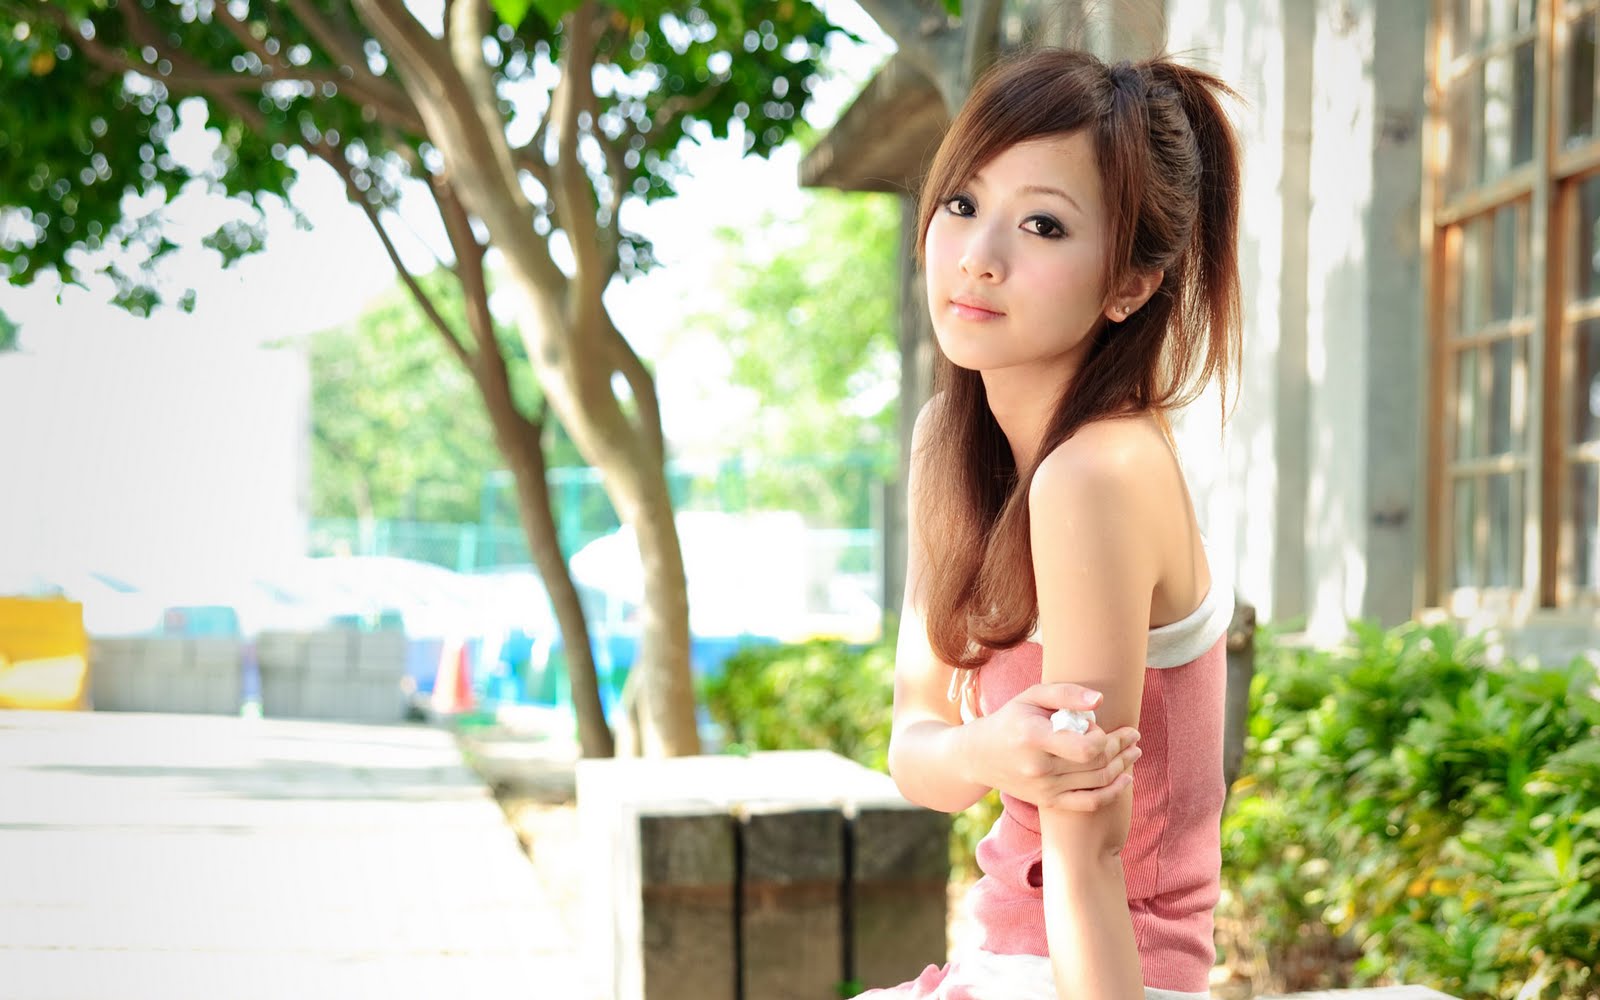 Cute Asian Girls HD Wallpaper In For Your